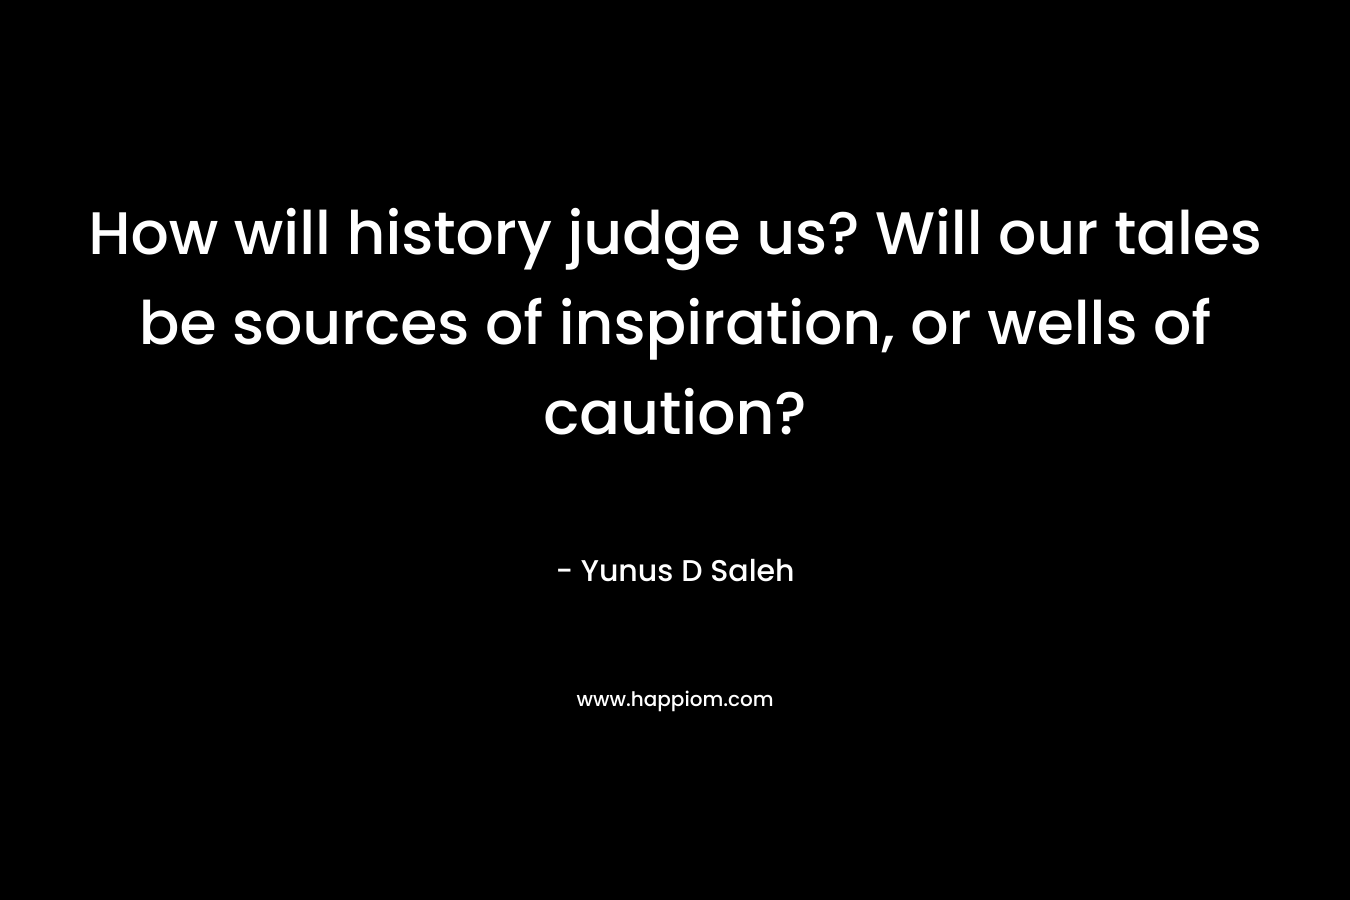 How will history judge us? Will our tales be sources of inspiration, or wells of caution? – Yunus D Saleh